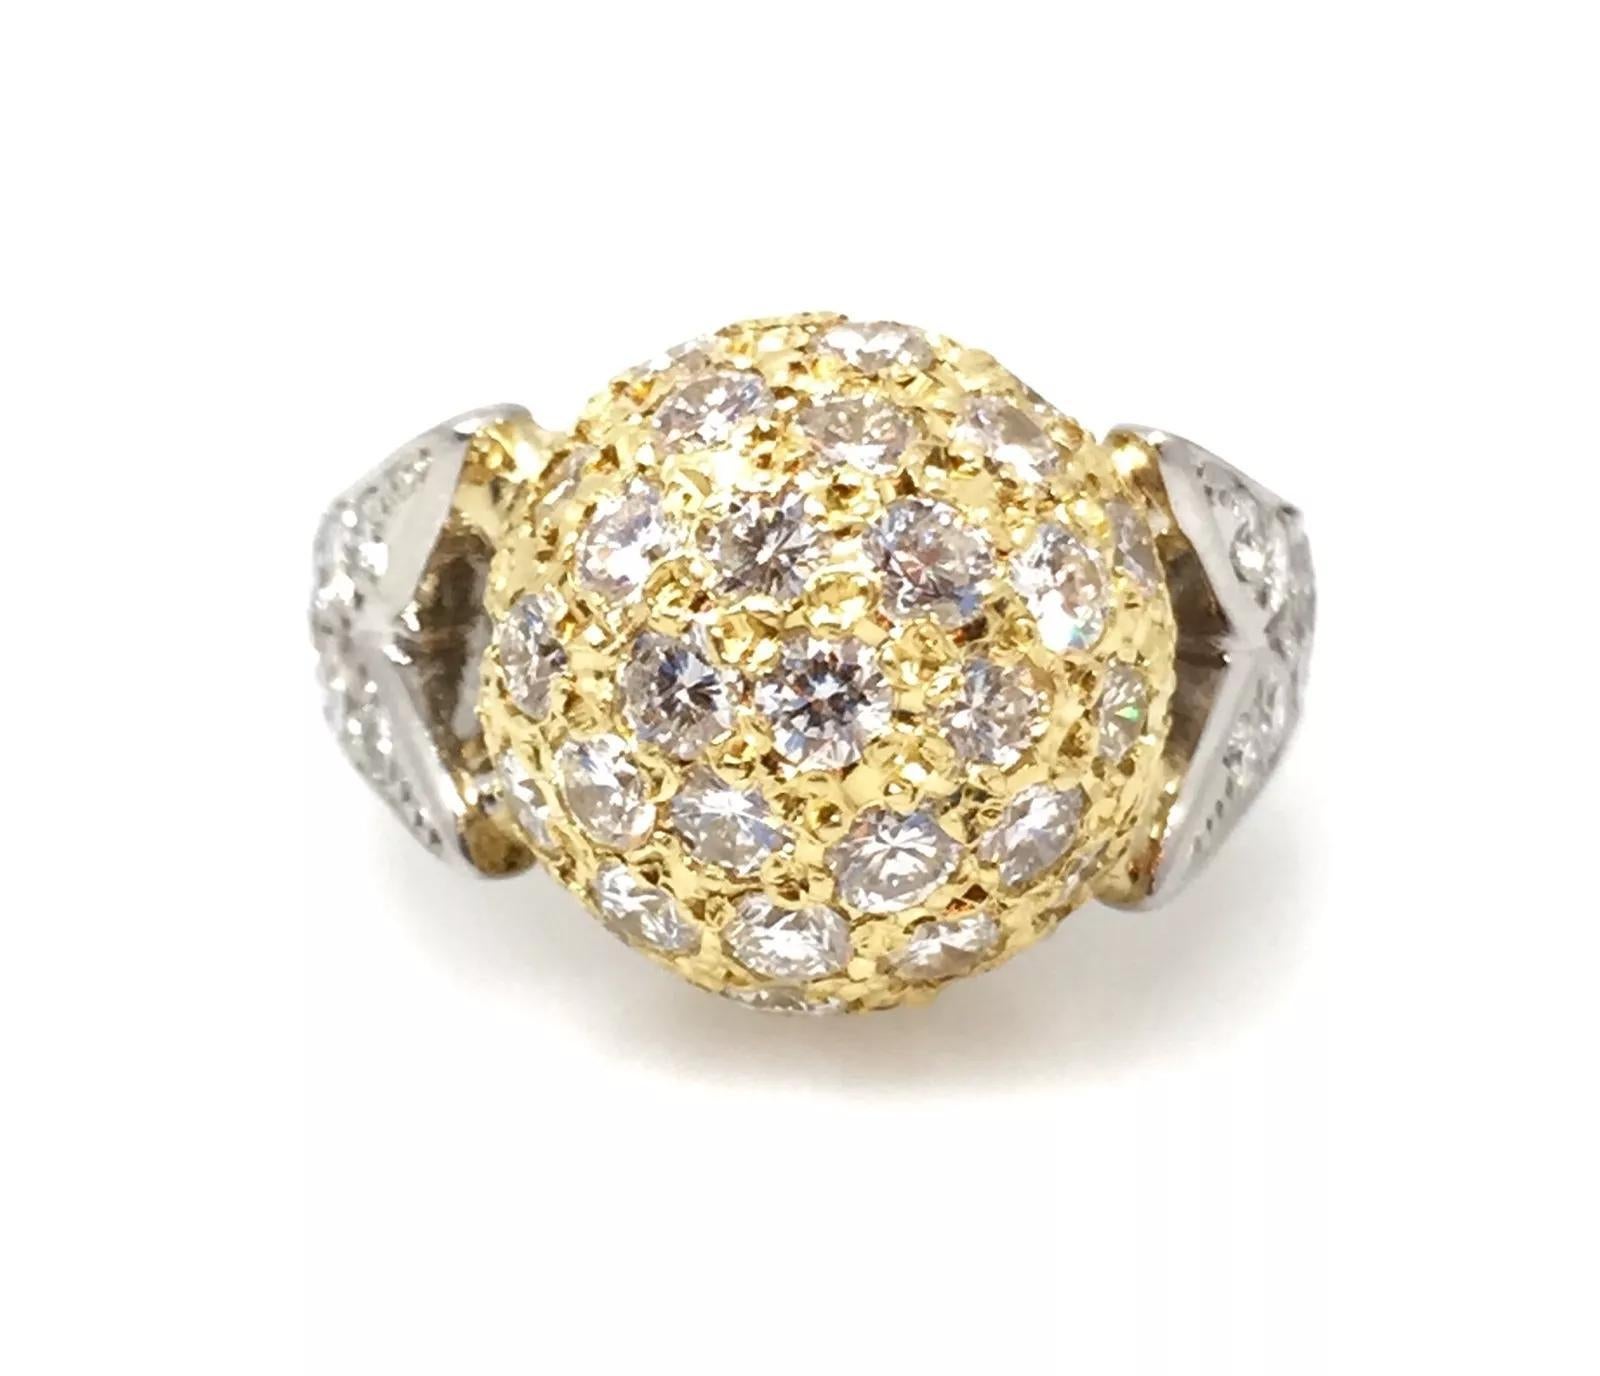 Diamond Pave Ball Ring with 2.00 carat in Platinum and 18k Yellow Gold In Excellent Condition For Sale In La Jolla, CA